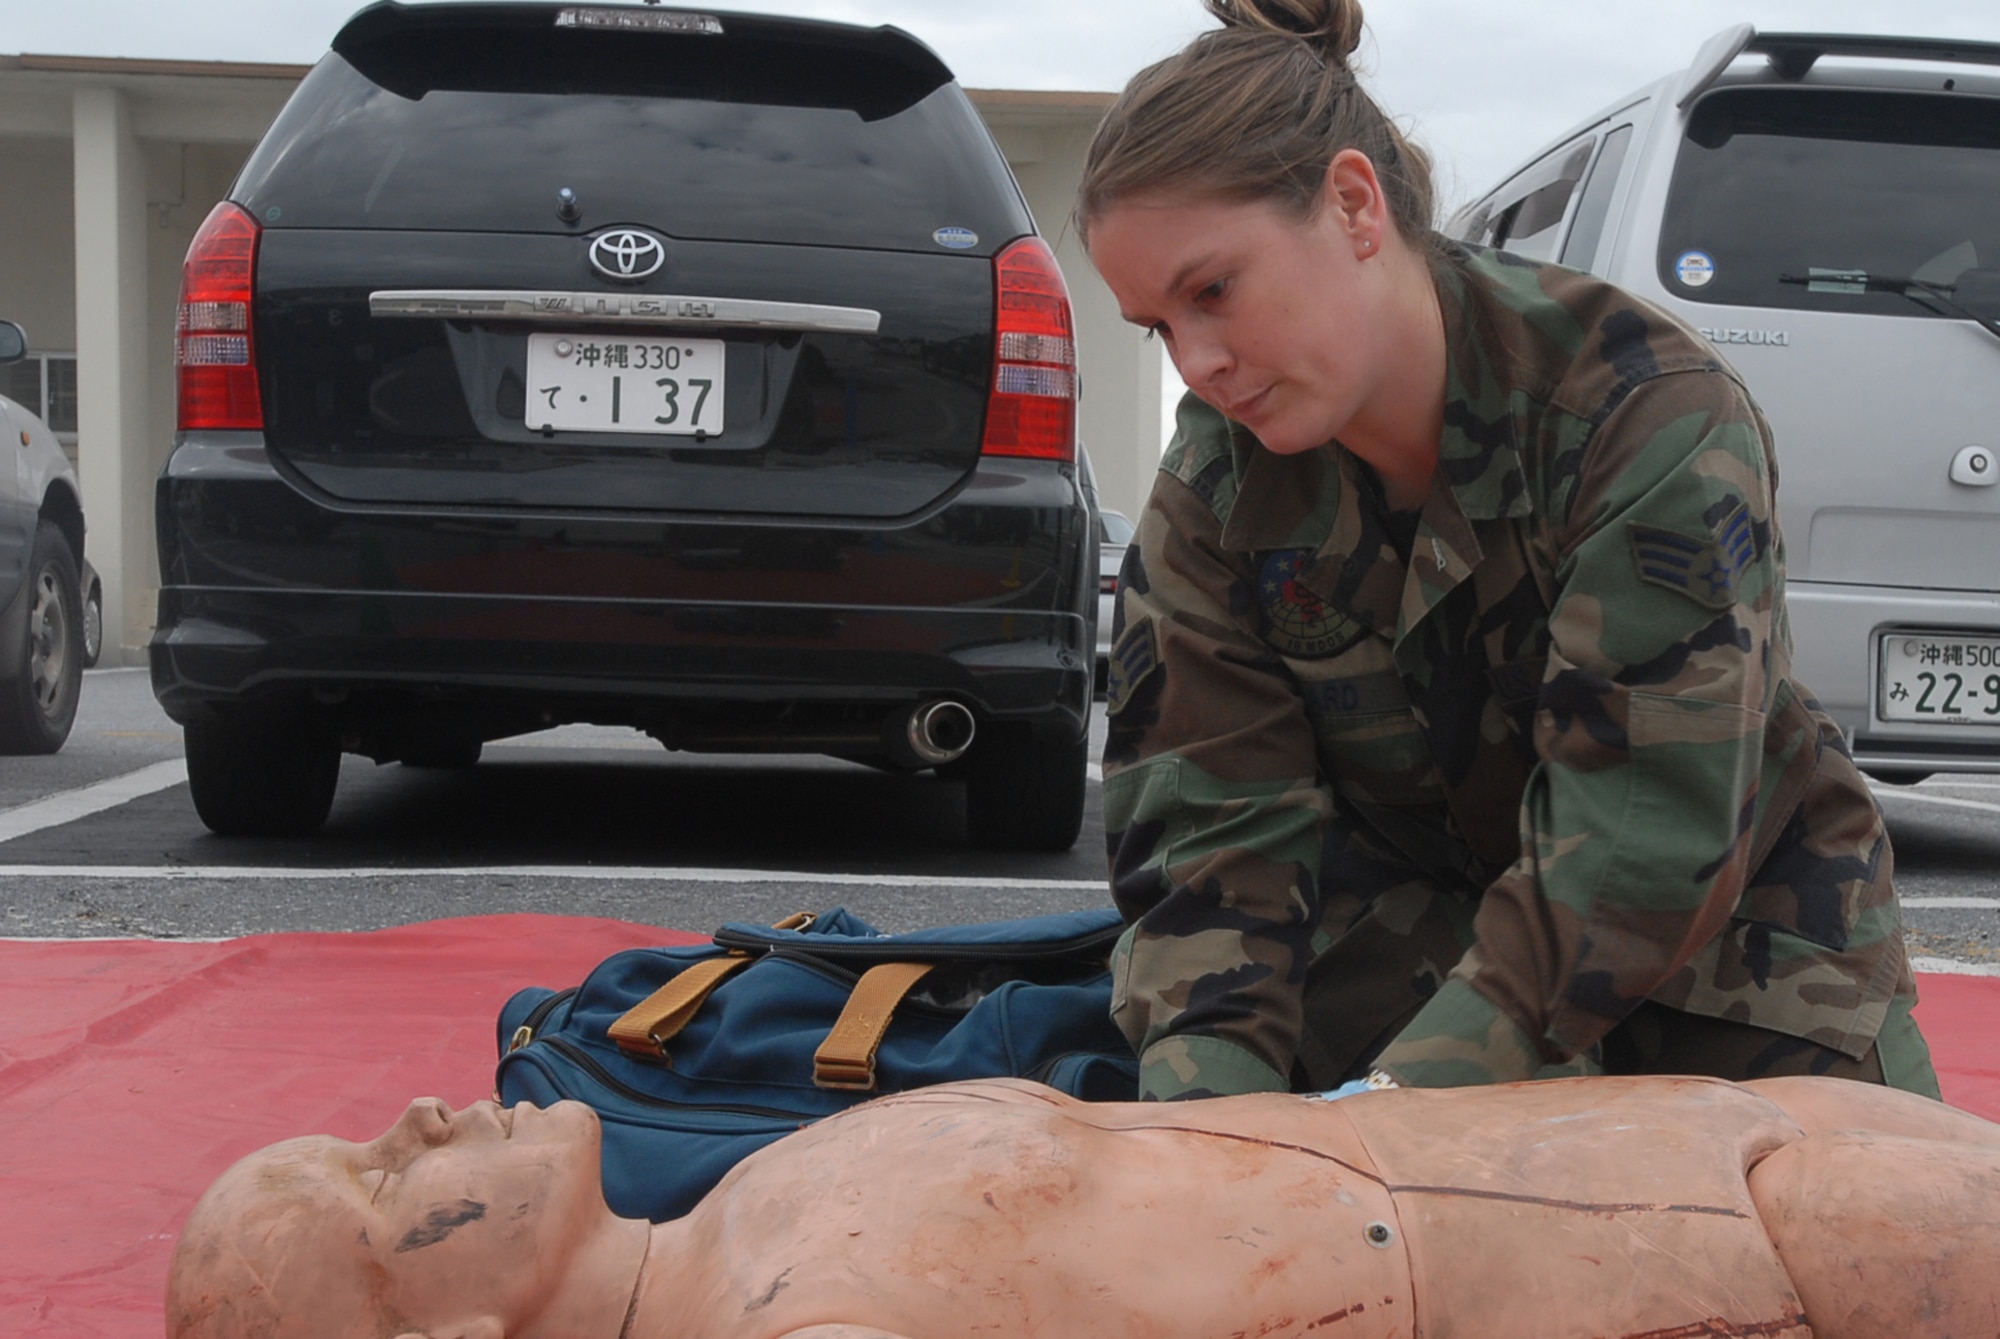 Senior Airman Ashley Sard, 18th Medical Operations Squadron, checks the status of a casaulty during a Local Operational Readiness Exercise Beverly High 08-02 scenario at Kadena Air Base, Japan, Dec. 4, 2007. This scenario tested the paramedics ability to treat people injured in a fire. (U.S. Air Force /Senior Airman Darnell T. Cannady) 